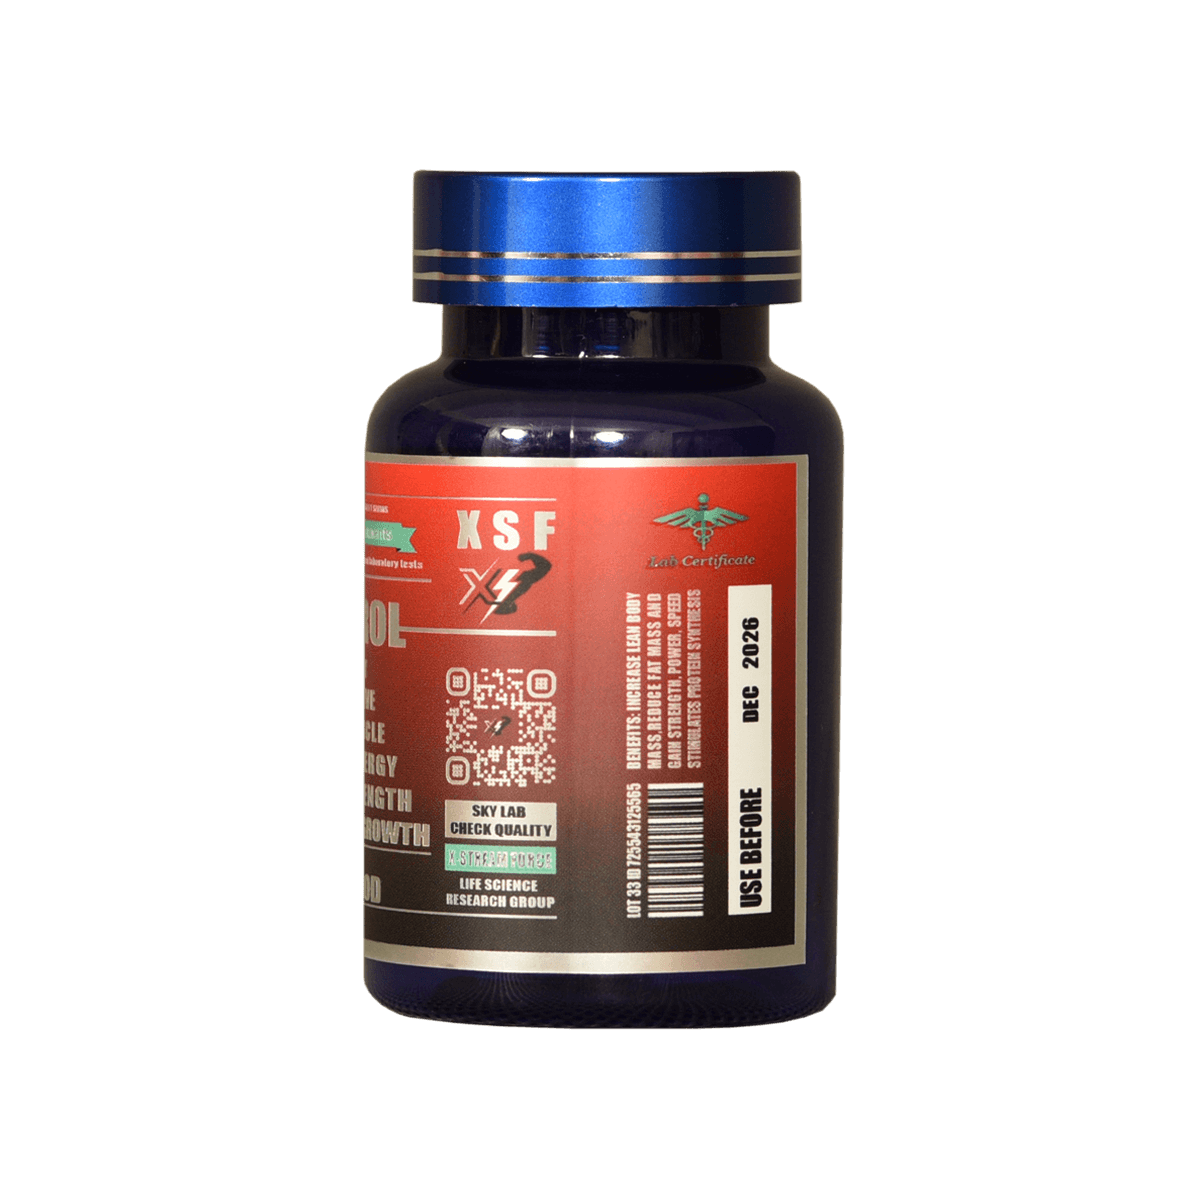 ligandrol-lgd4033-capsules-90-5mg-muscle shop-xstreamforce-for muscle mass-strength-volume-dramatic gains✦lgd4033 sarms✦ fitness supplements-muscle-hunter